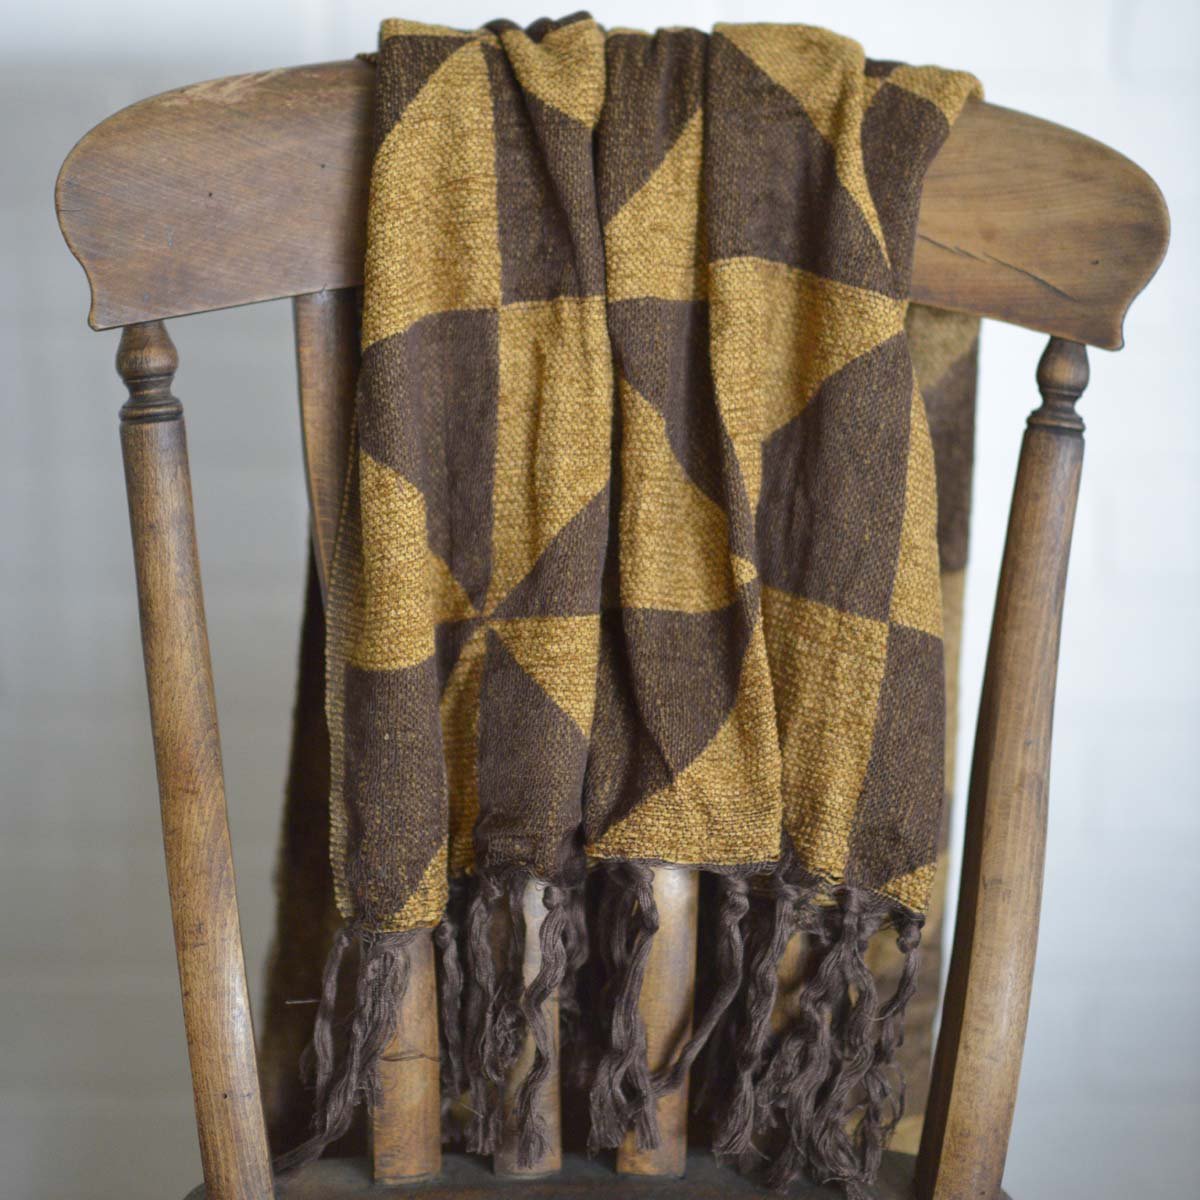 Kendrick Chenille Jacquard Woven Throw by VHC Brands